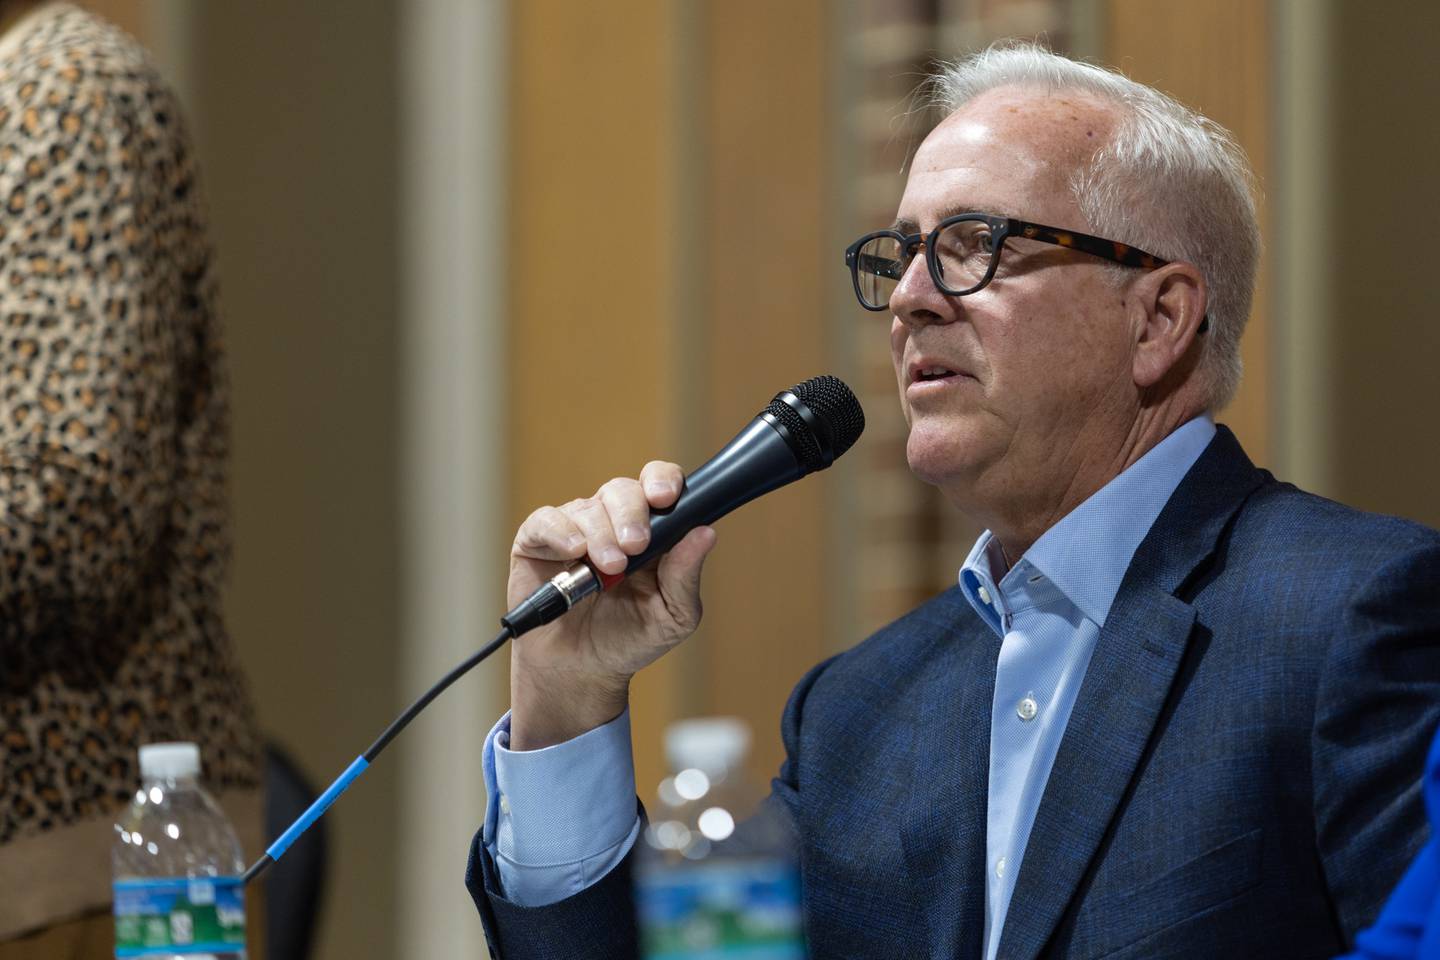 Mayoral candidate Terry D'Arcy speaks at a Joliet Mayoral Forum hosted by the the National Hook-up of Black Women, in Joliet on Saturday, Feb. 18, 2023.